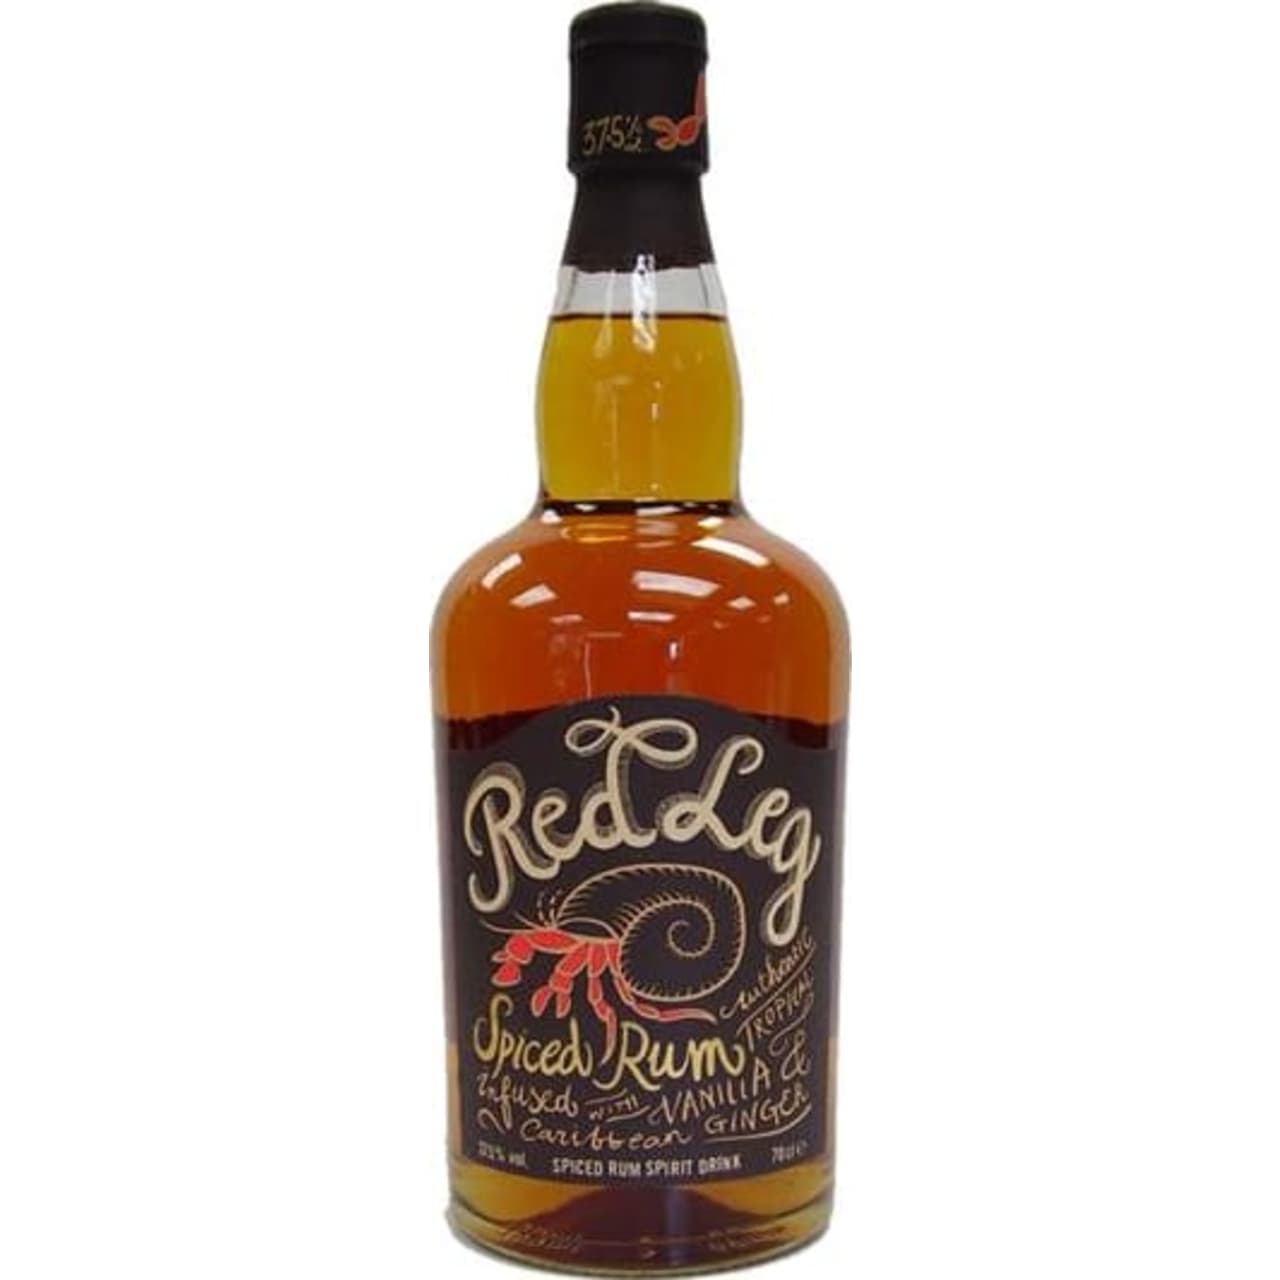 RedLeg is a spiced rum made with Caribbean spirit which has been aged in old oak whilst being infused with Jamaican vanilla and ginger.